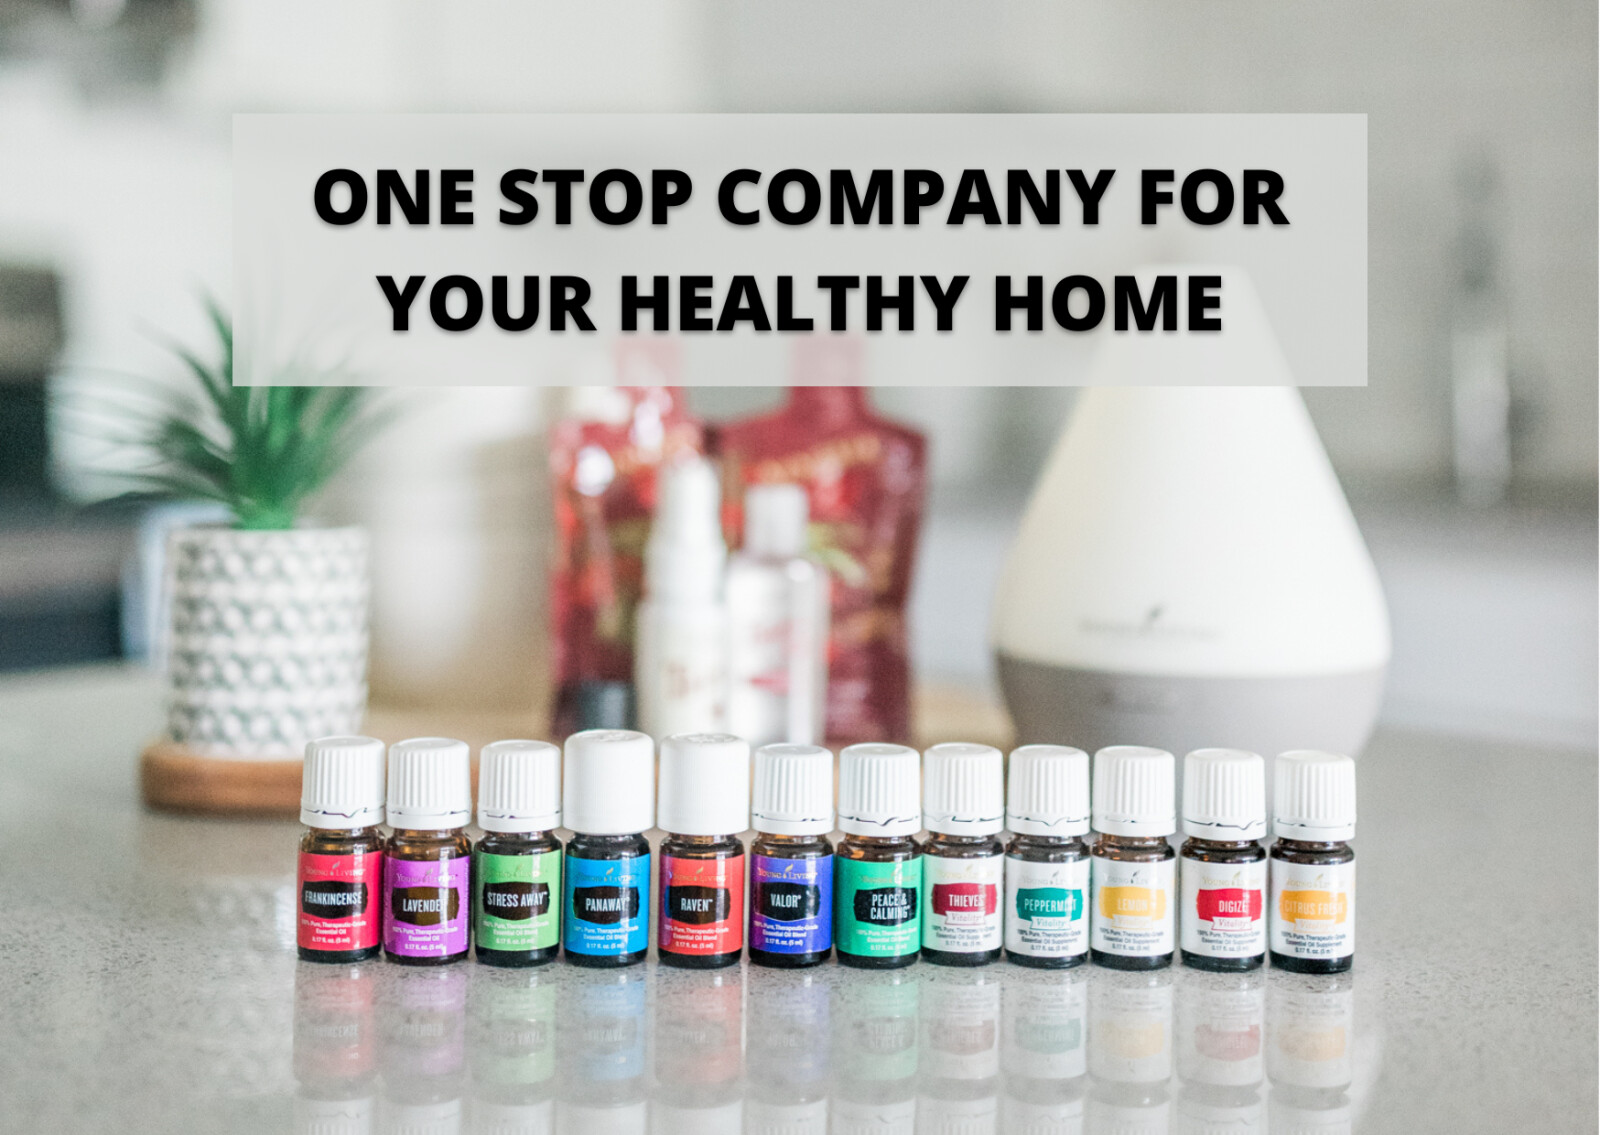 ONE STOP COMPANY FOR YOUR HEALTHY HOME